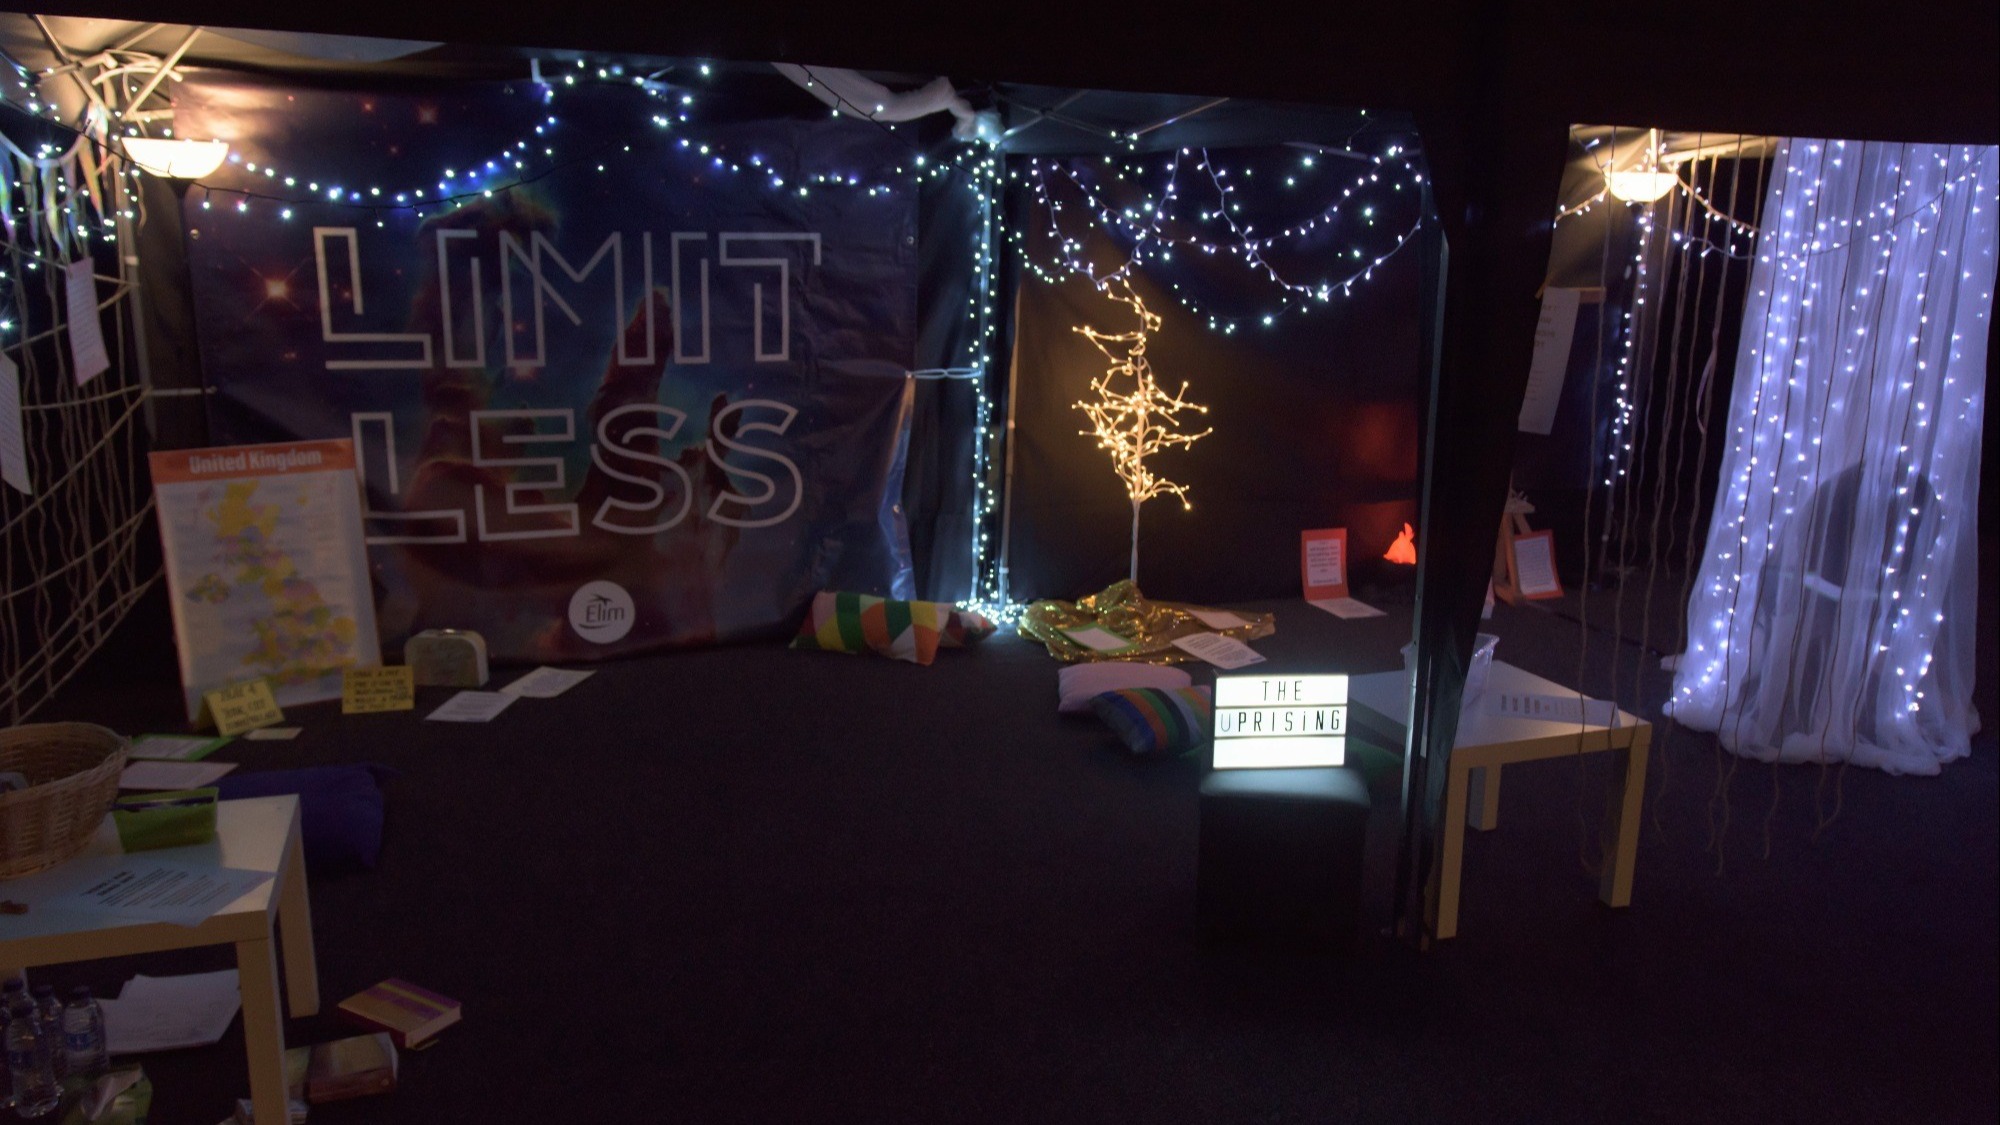 Limitless Festival - The Space